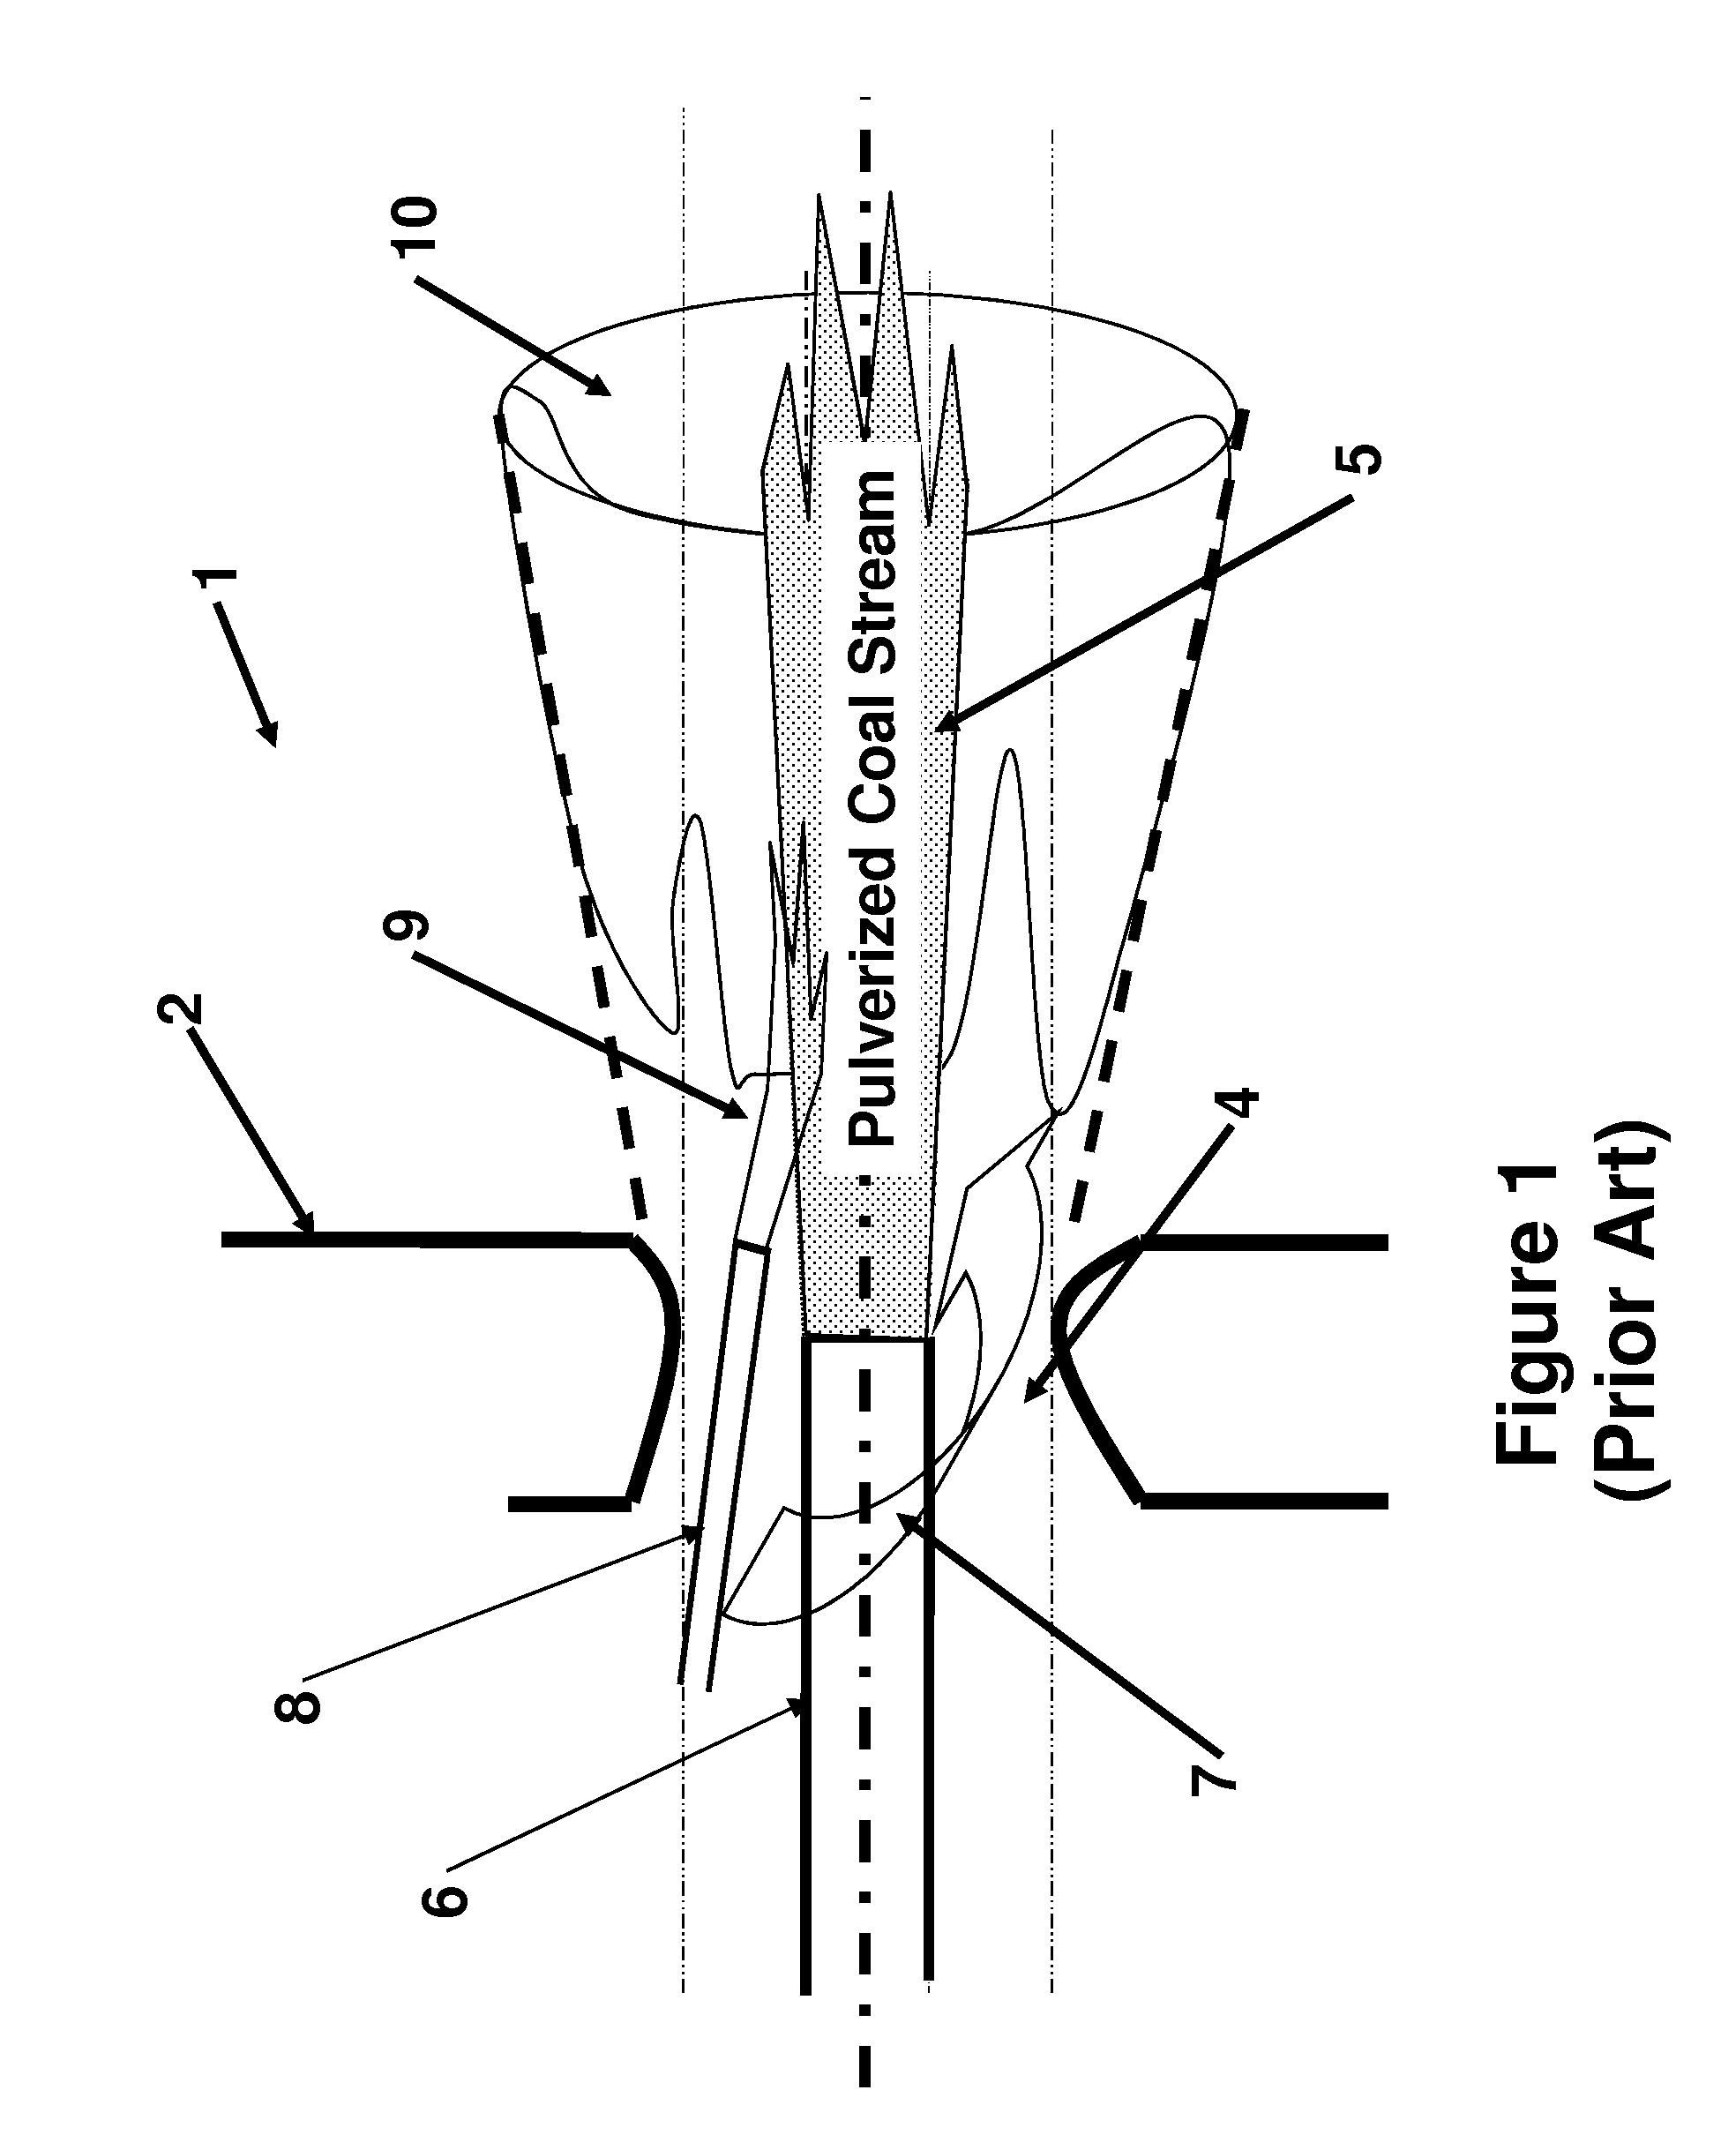 Method of Co-Firing Coal or Oil with a Gaseous Fuel in a Furnace